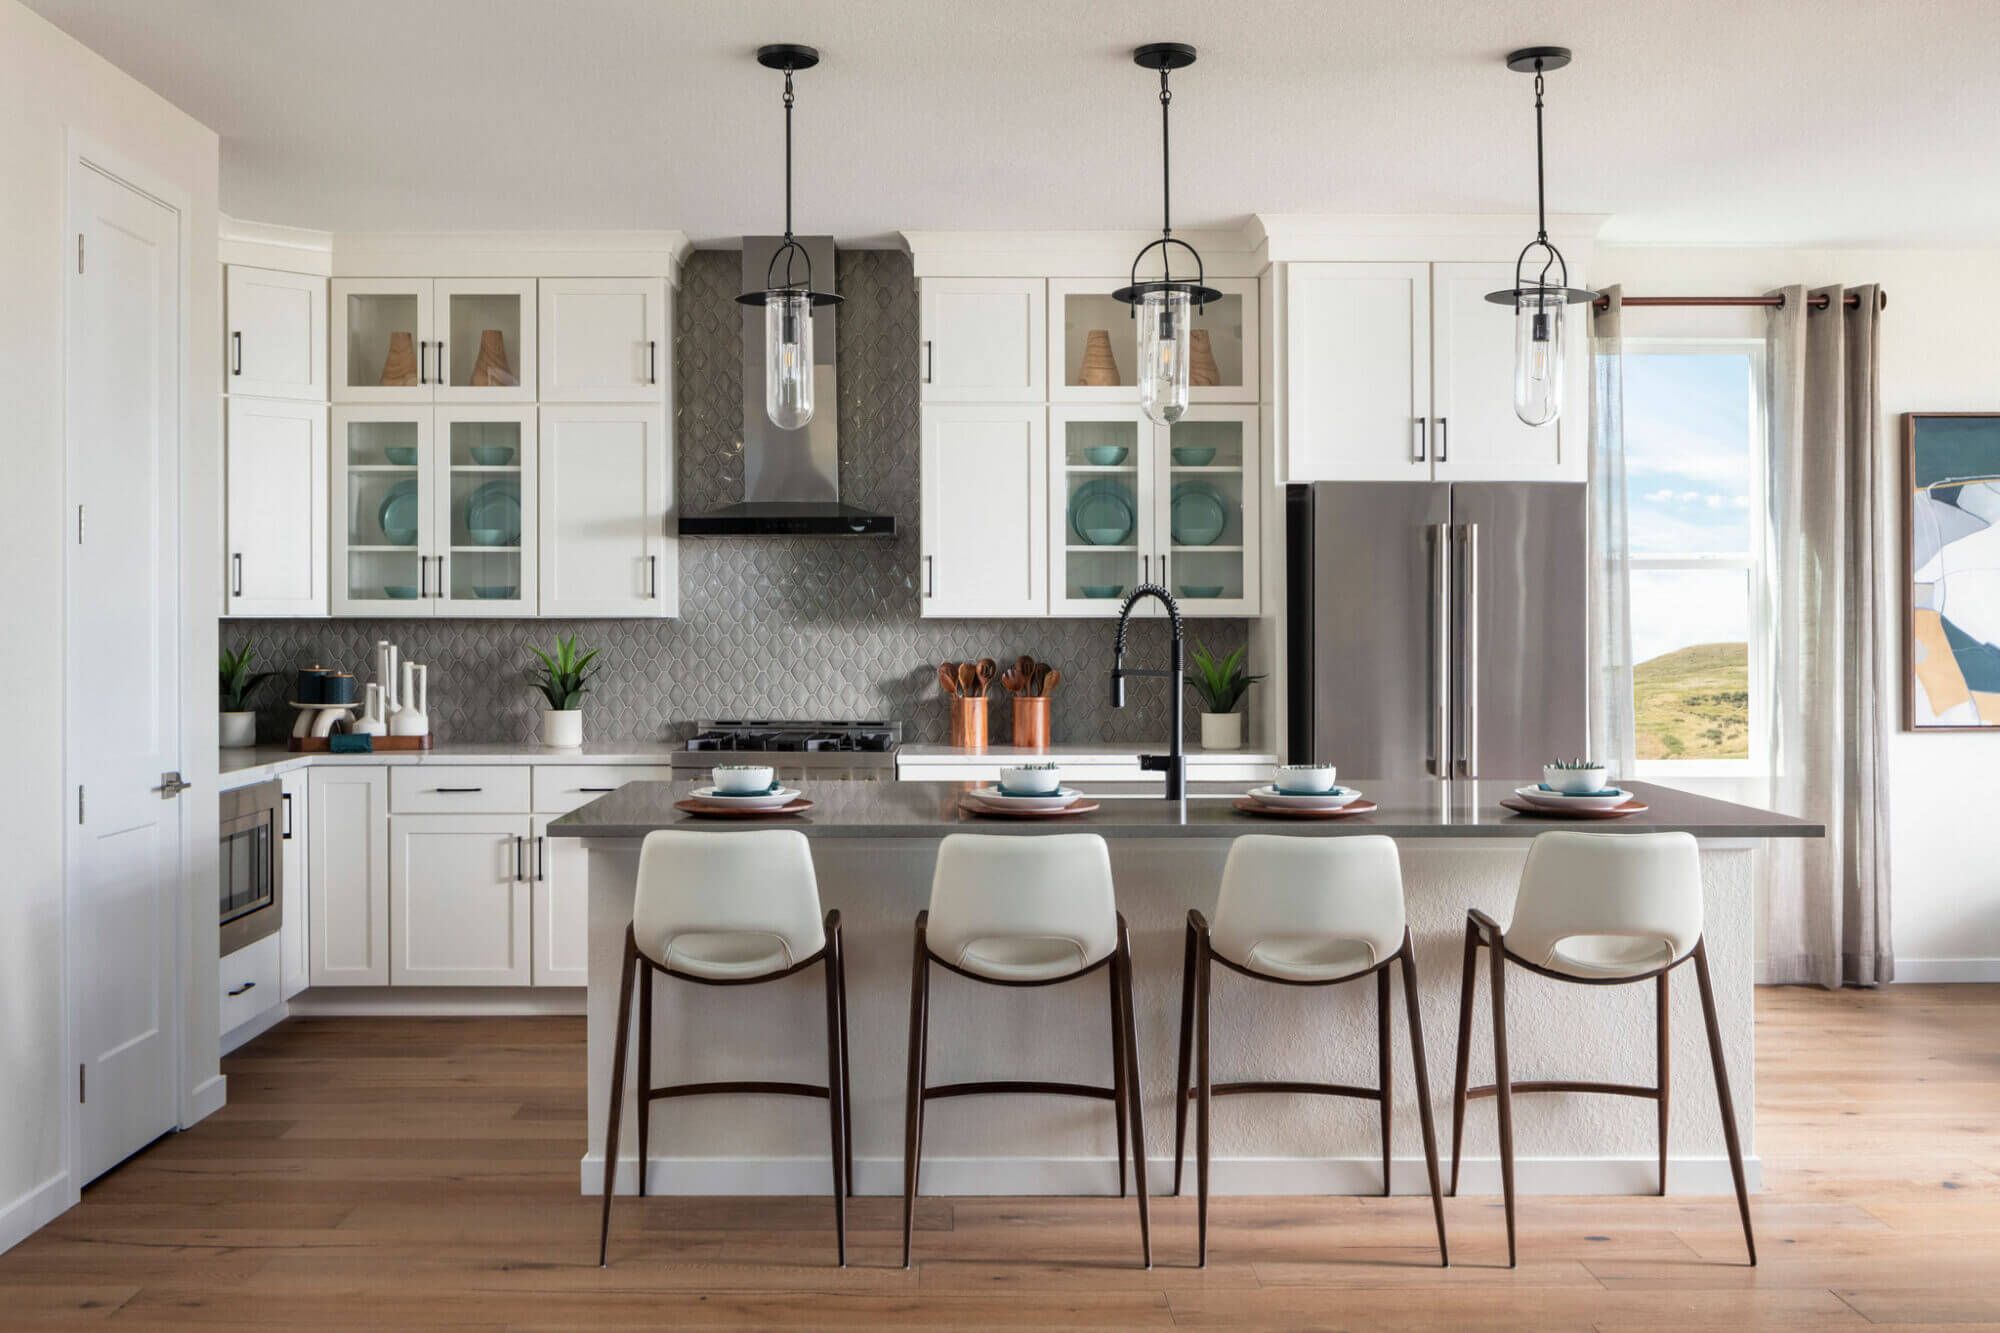 A white kitchen with a center island and bar stools.